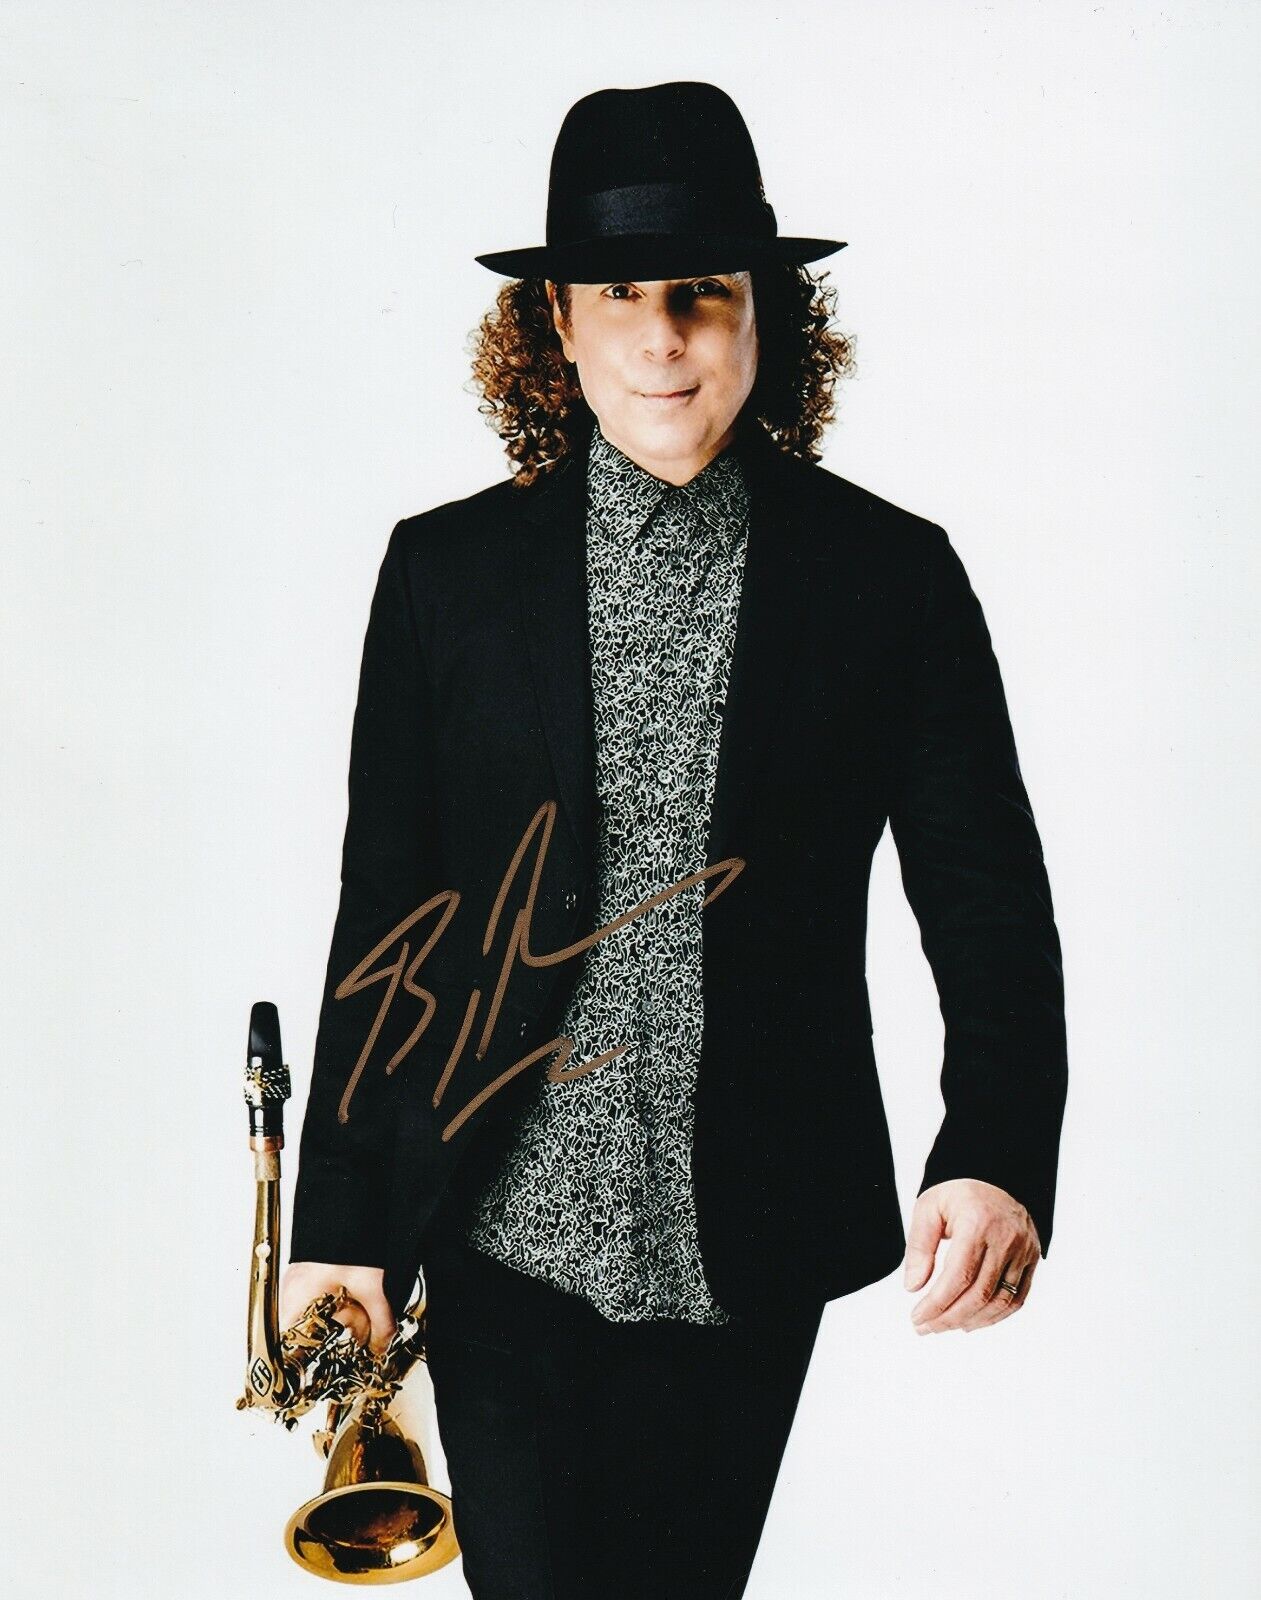 Boney James REAL hand SIGNED Photo Poster painting #1 COA Autographed Saxophonist